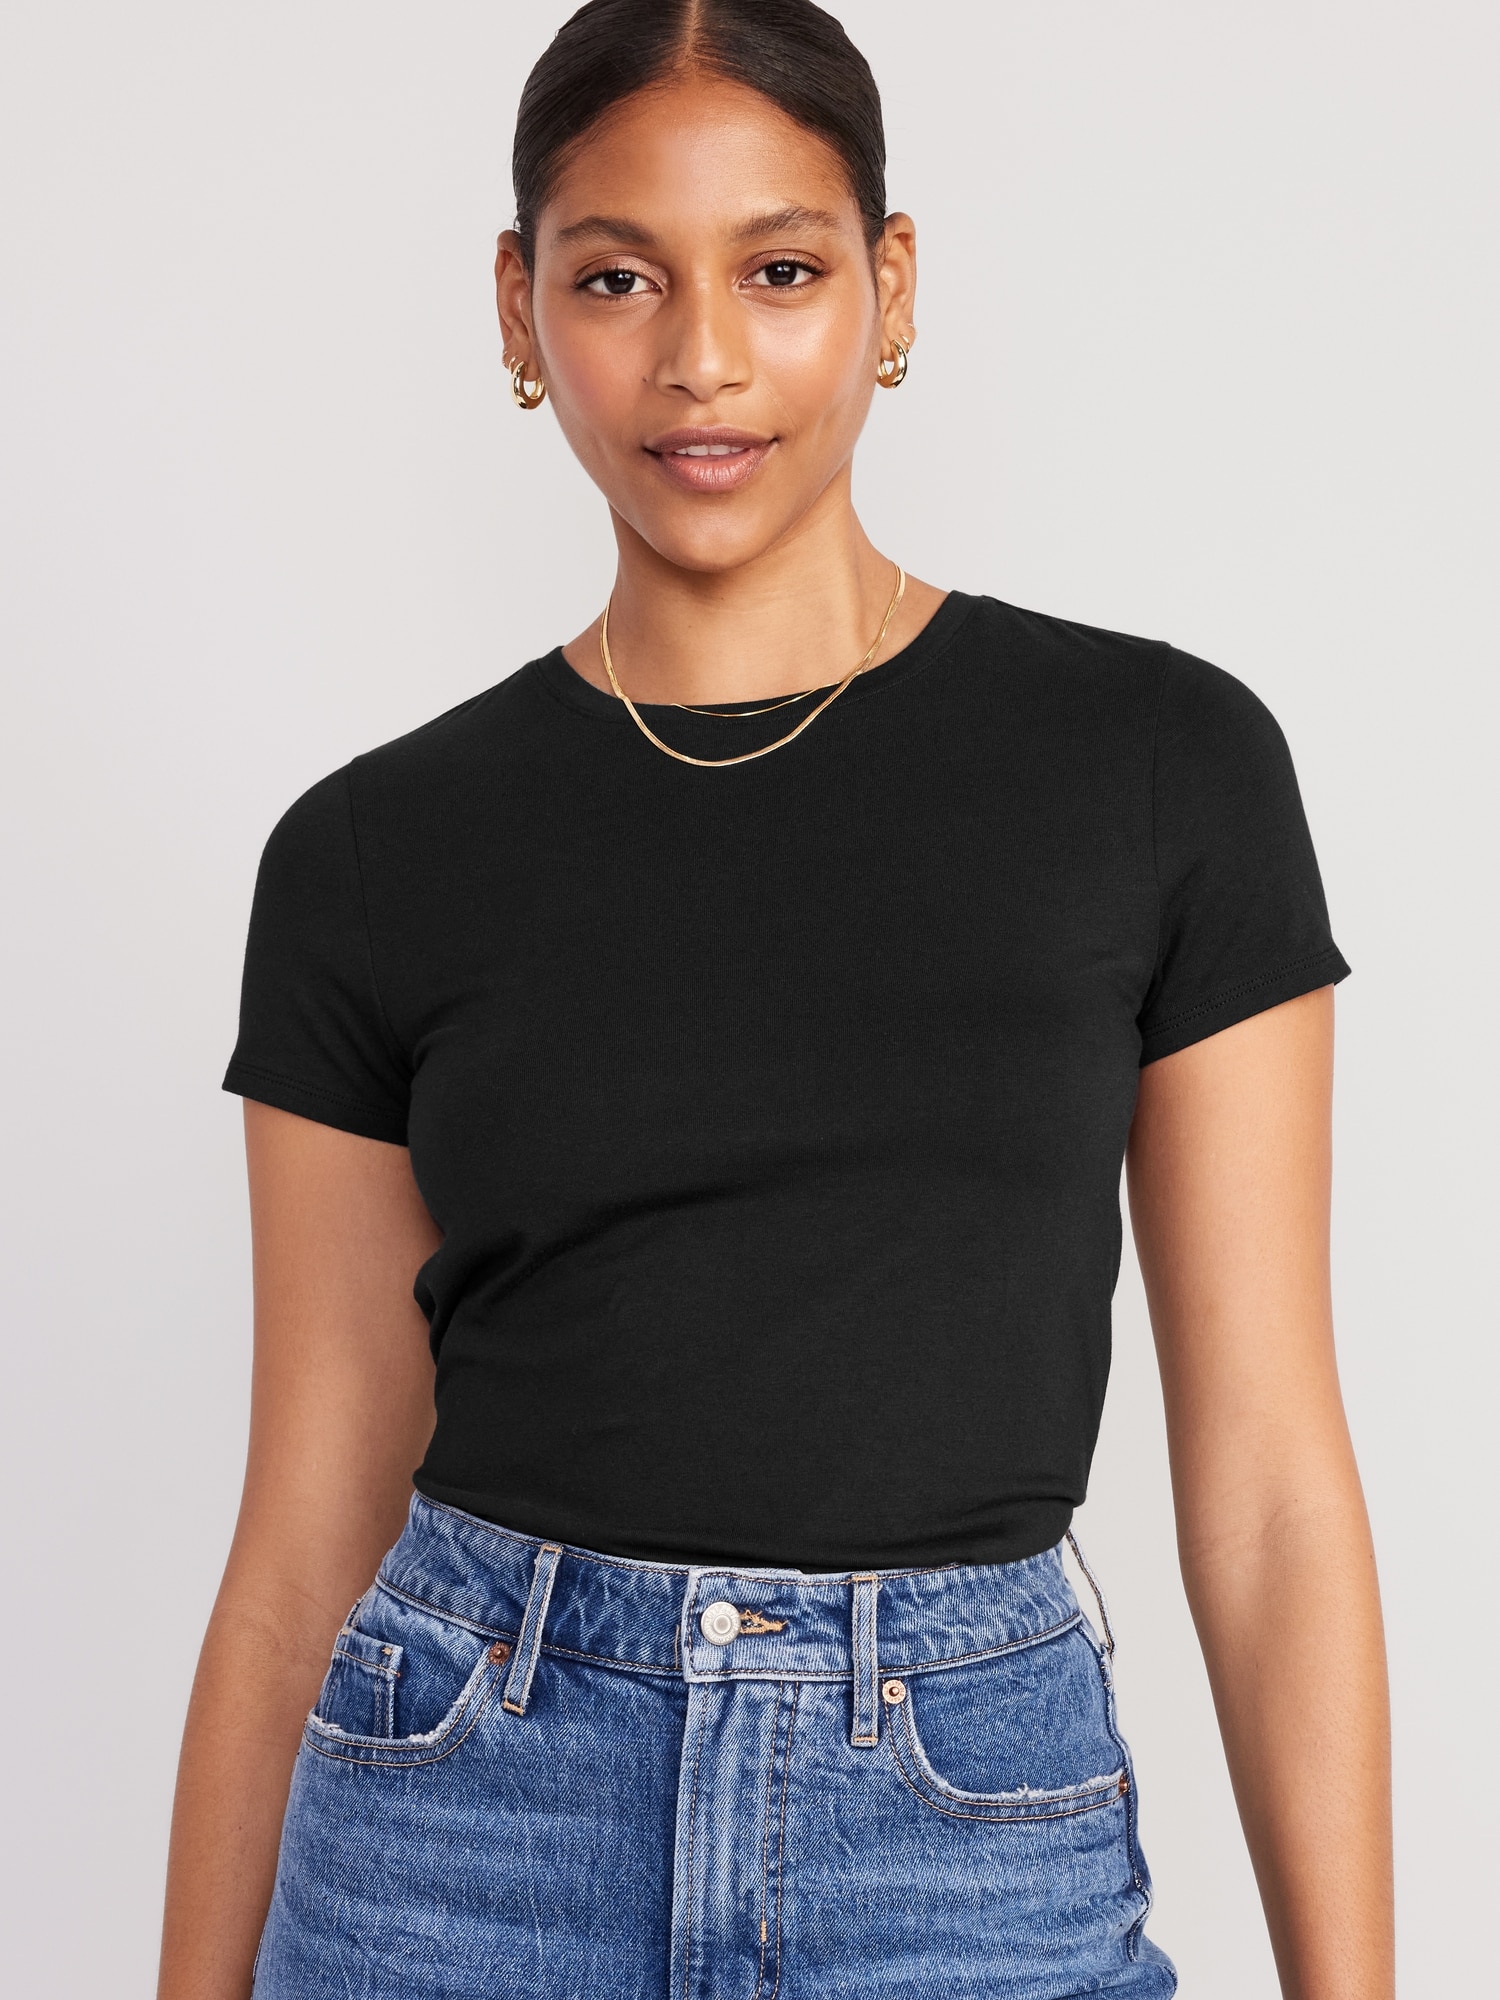 Slim-Fit T-Shirt for Women | Old Navy